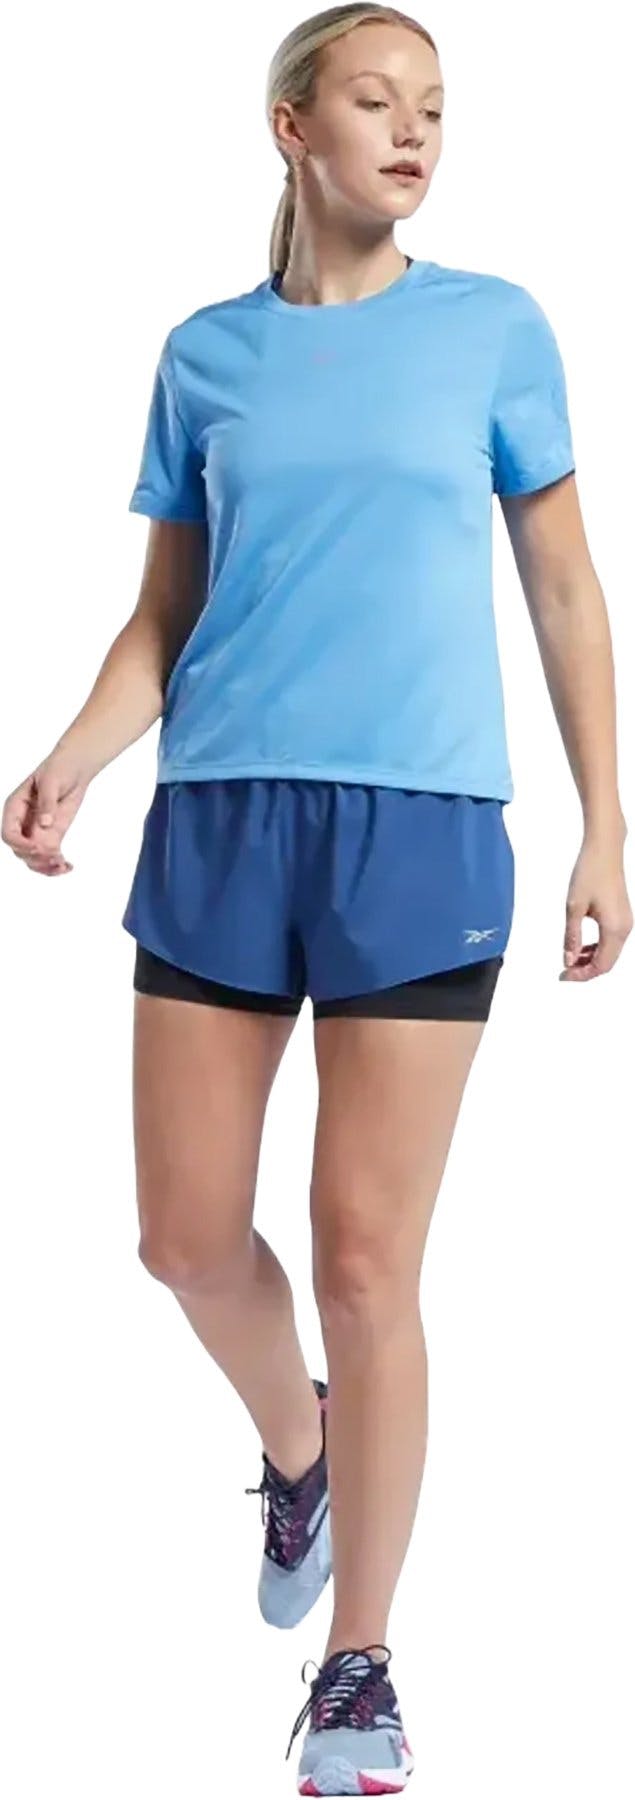 Product image for Workout Ready Run Speedwick T-shirt - Women's